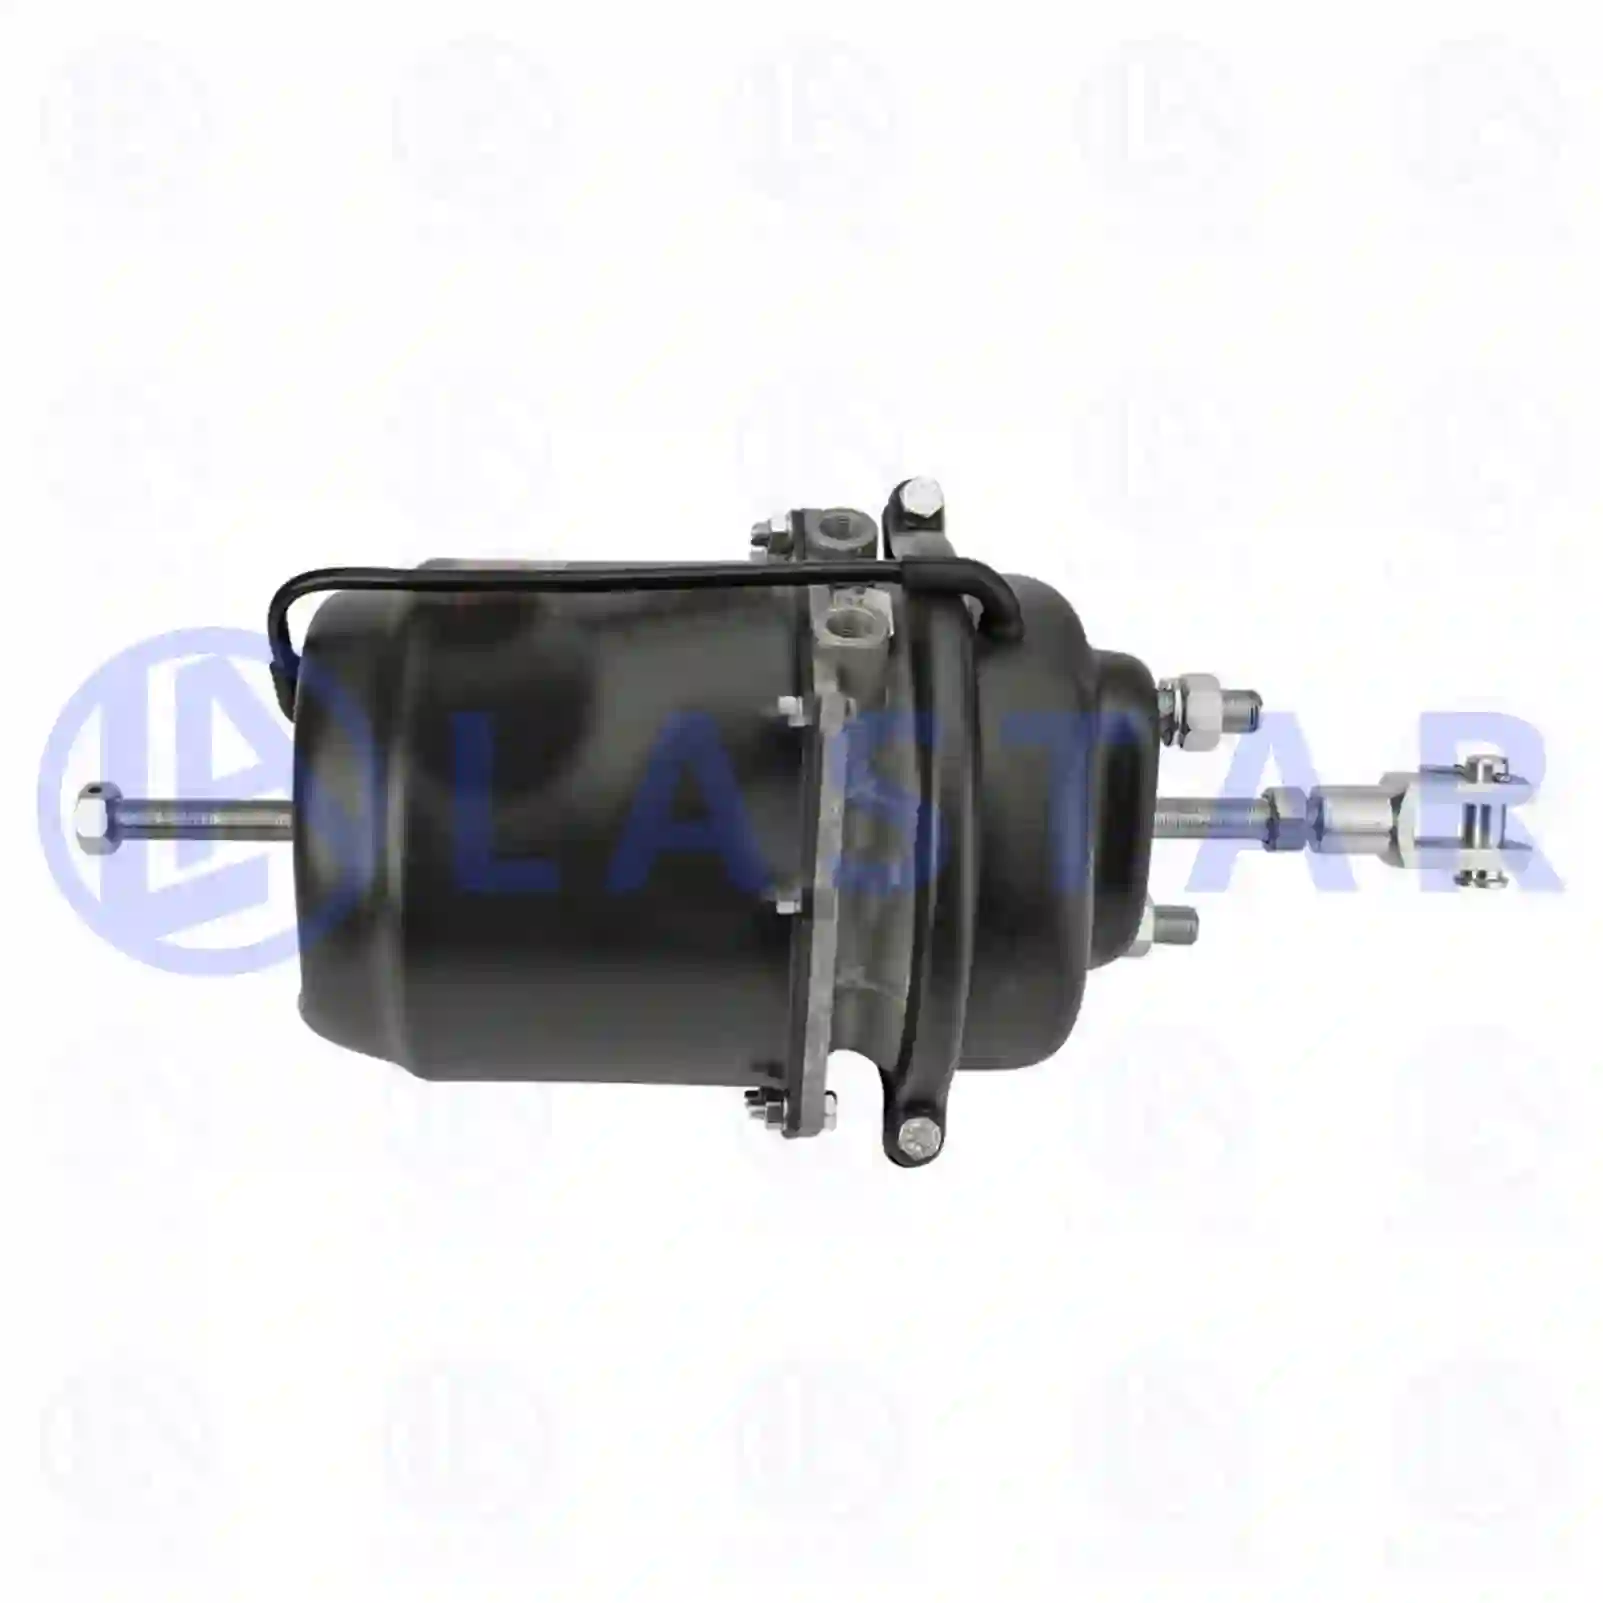 Spring brake cylinder, right, 77715016, 1519121, 1519122, 79757, N1011013215, 0064205218, 006420521880, 011013215, 070215000 ||  77715016 Lastar Spare Part | Truck Spare Parts, Auotomotive Spare Parts Spring brake cylinder, right, 77715016, 1519121, 1519122, 79757, N1011013215, 0064205218, 006420521880, 011013215, 070215000 ||  77715016 Lastar Spare Part | Truck Spare Parts, Auotomotive Spare Parts